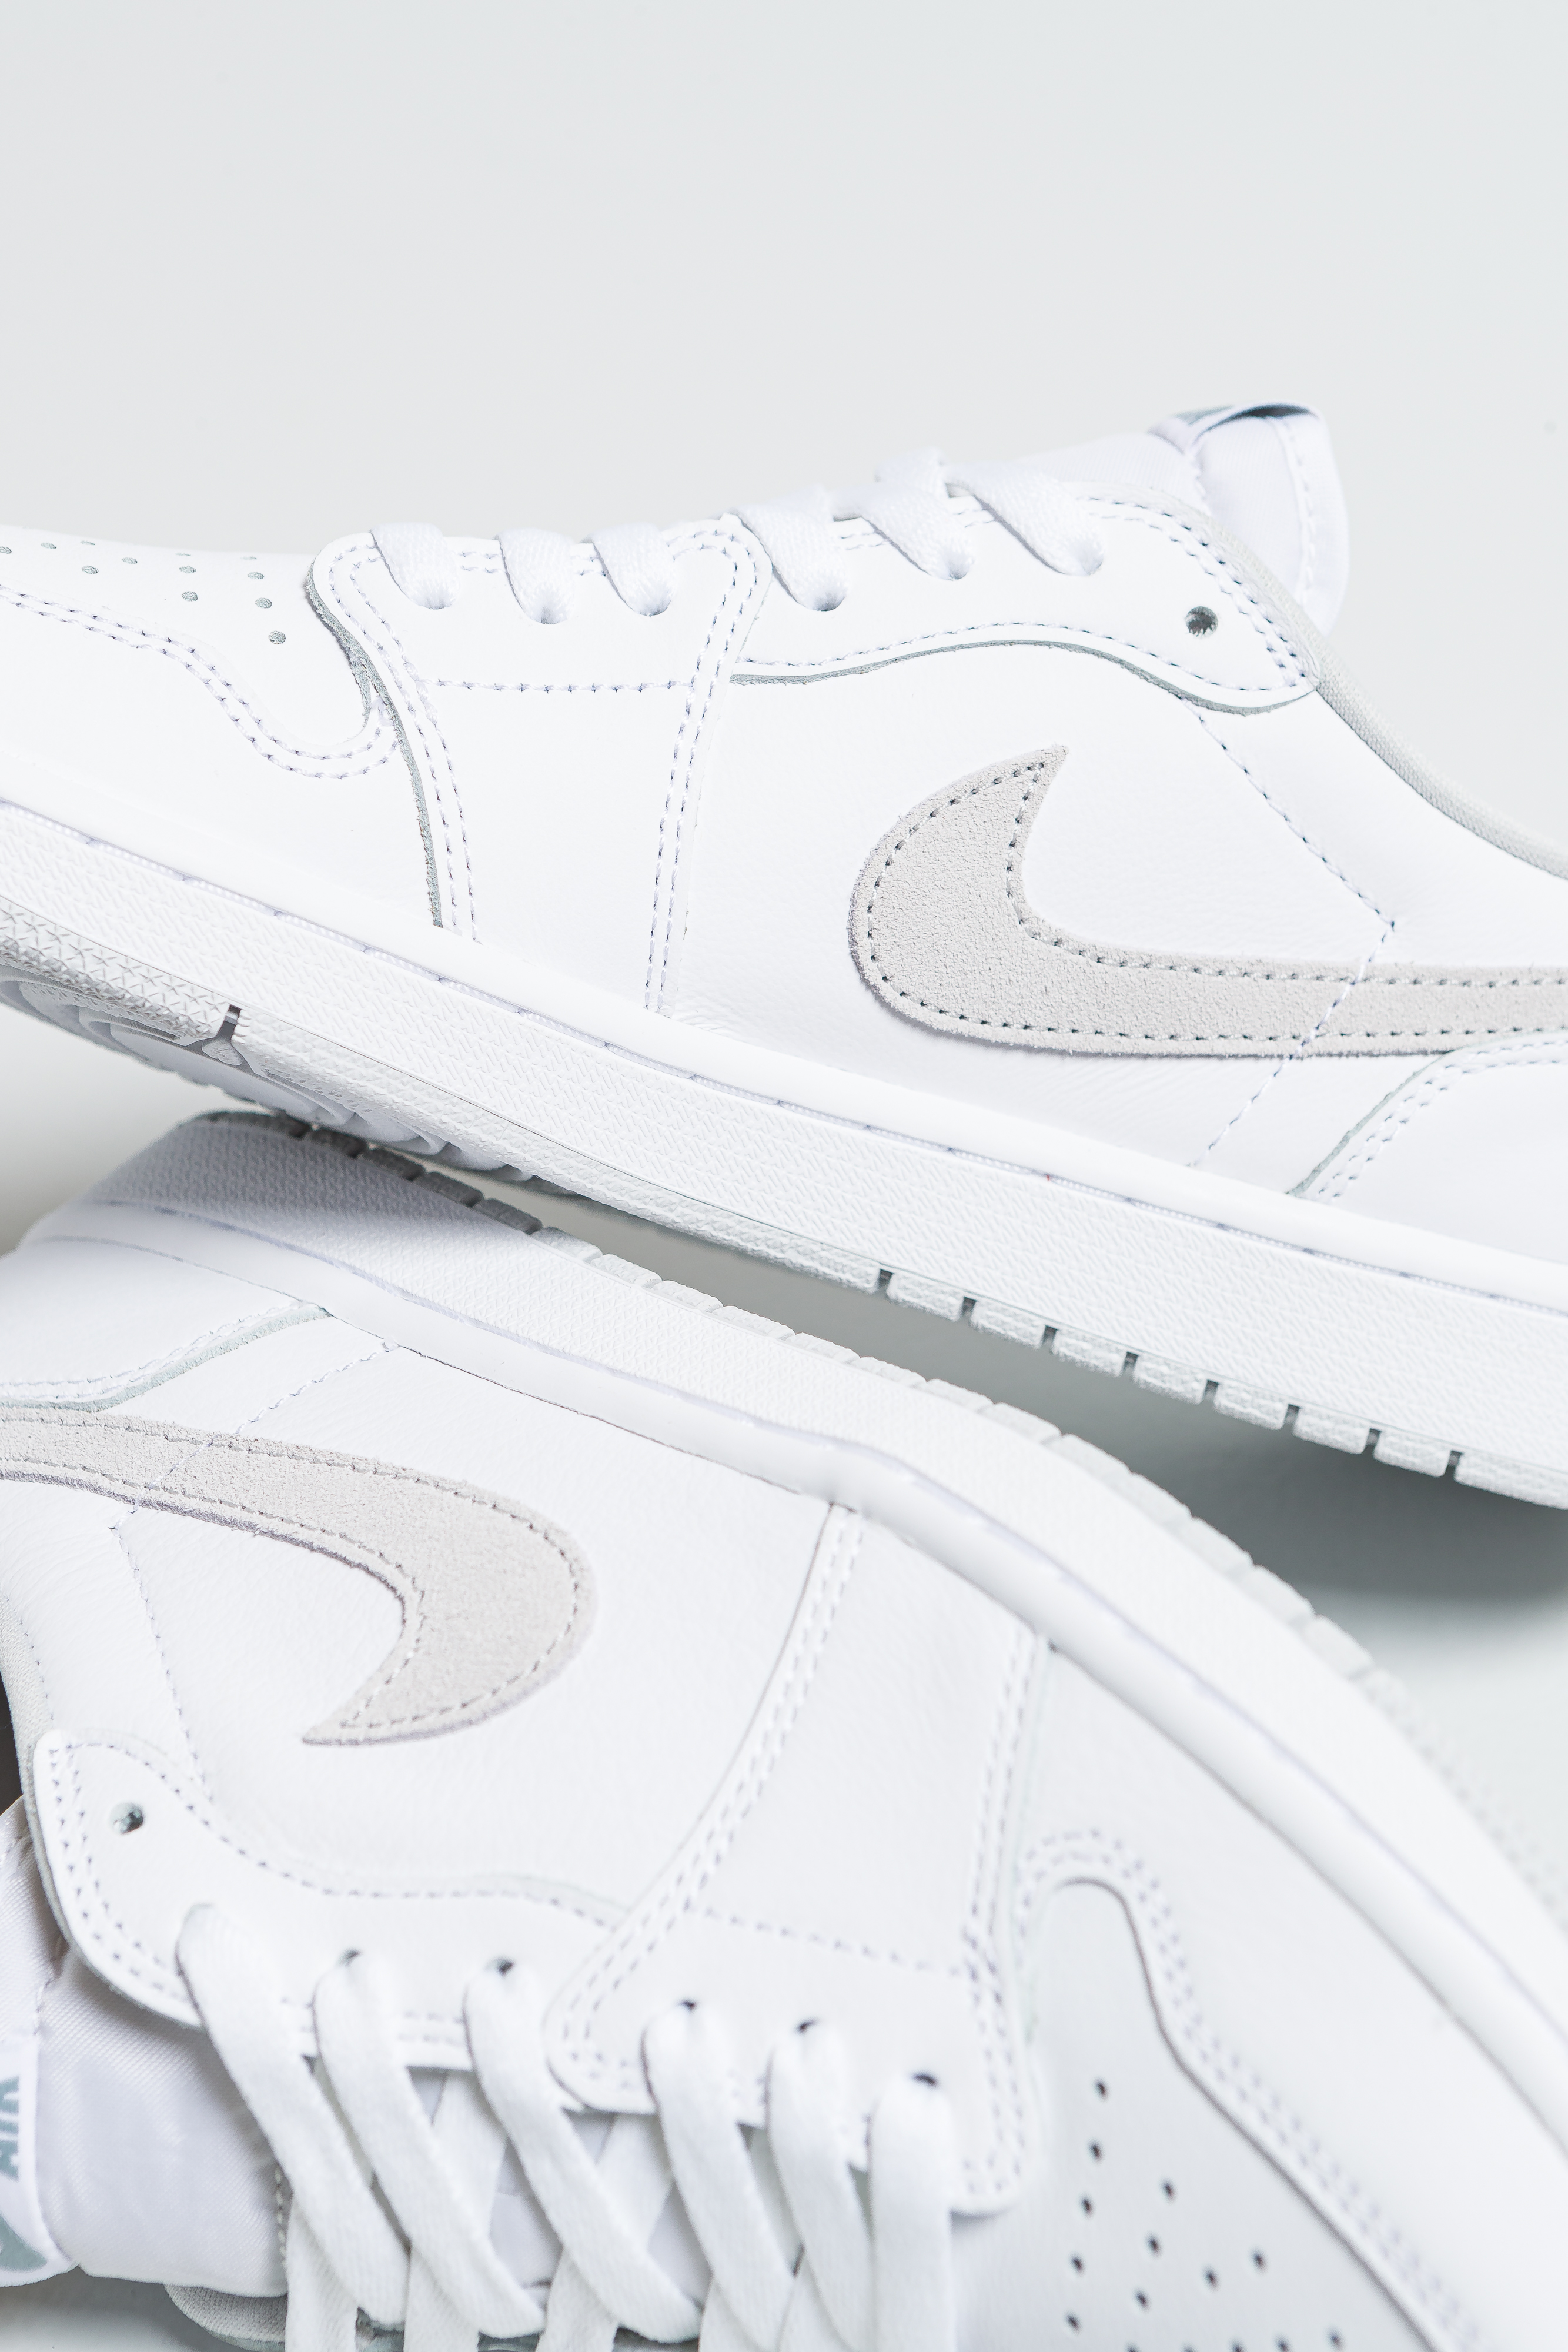 Up There Launches - Nike Air Jordan 1 Low Og 'Neutral Grey'